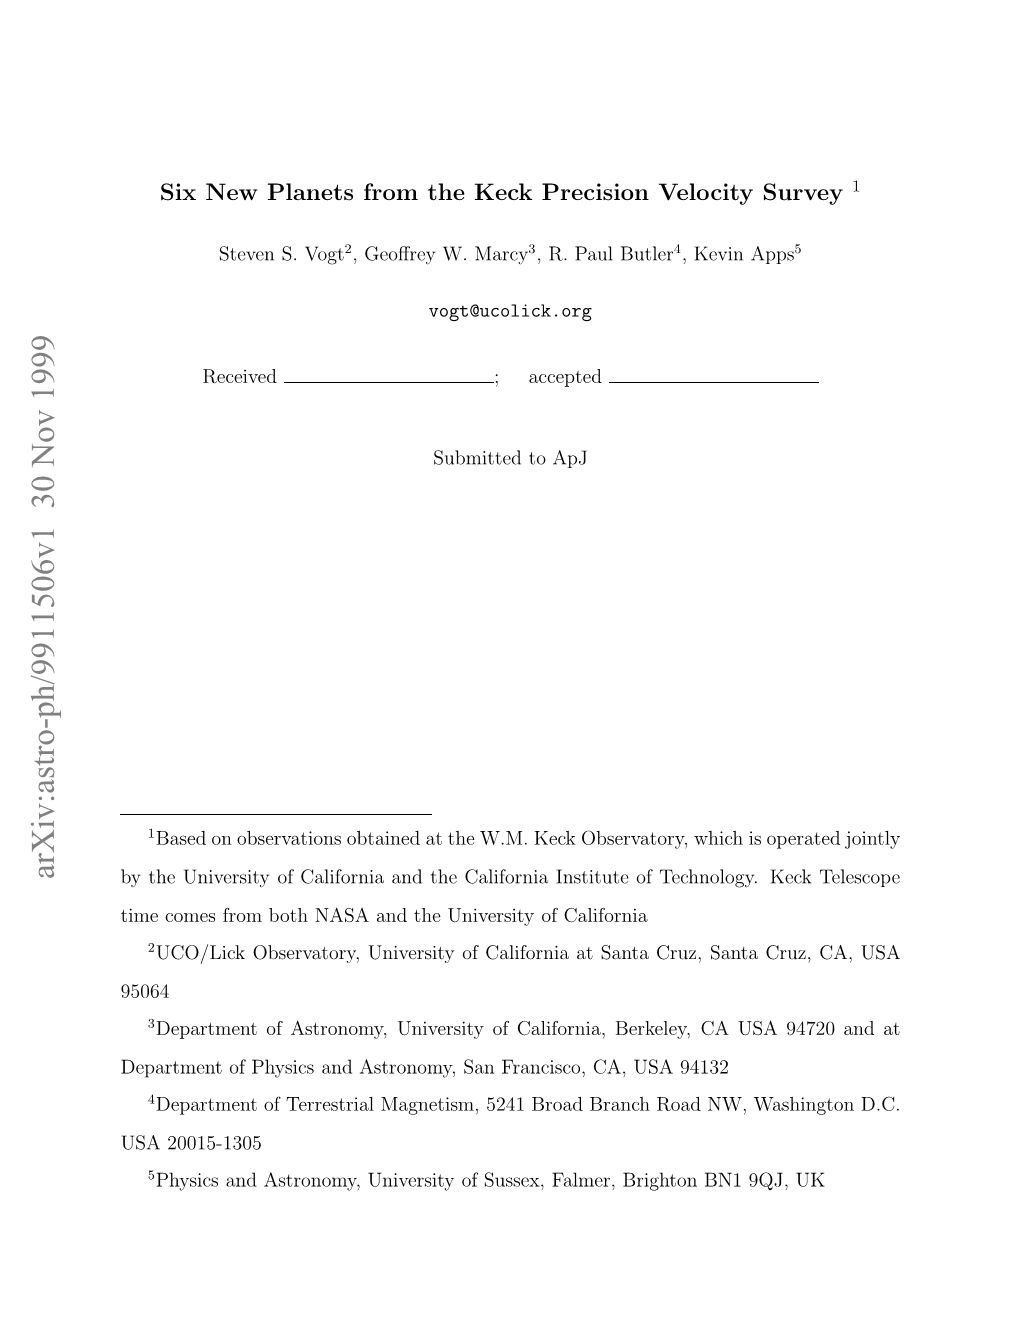 Six New Planets from the Keck Precision Velocity Survey